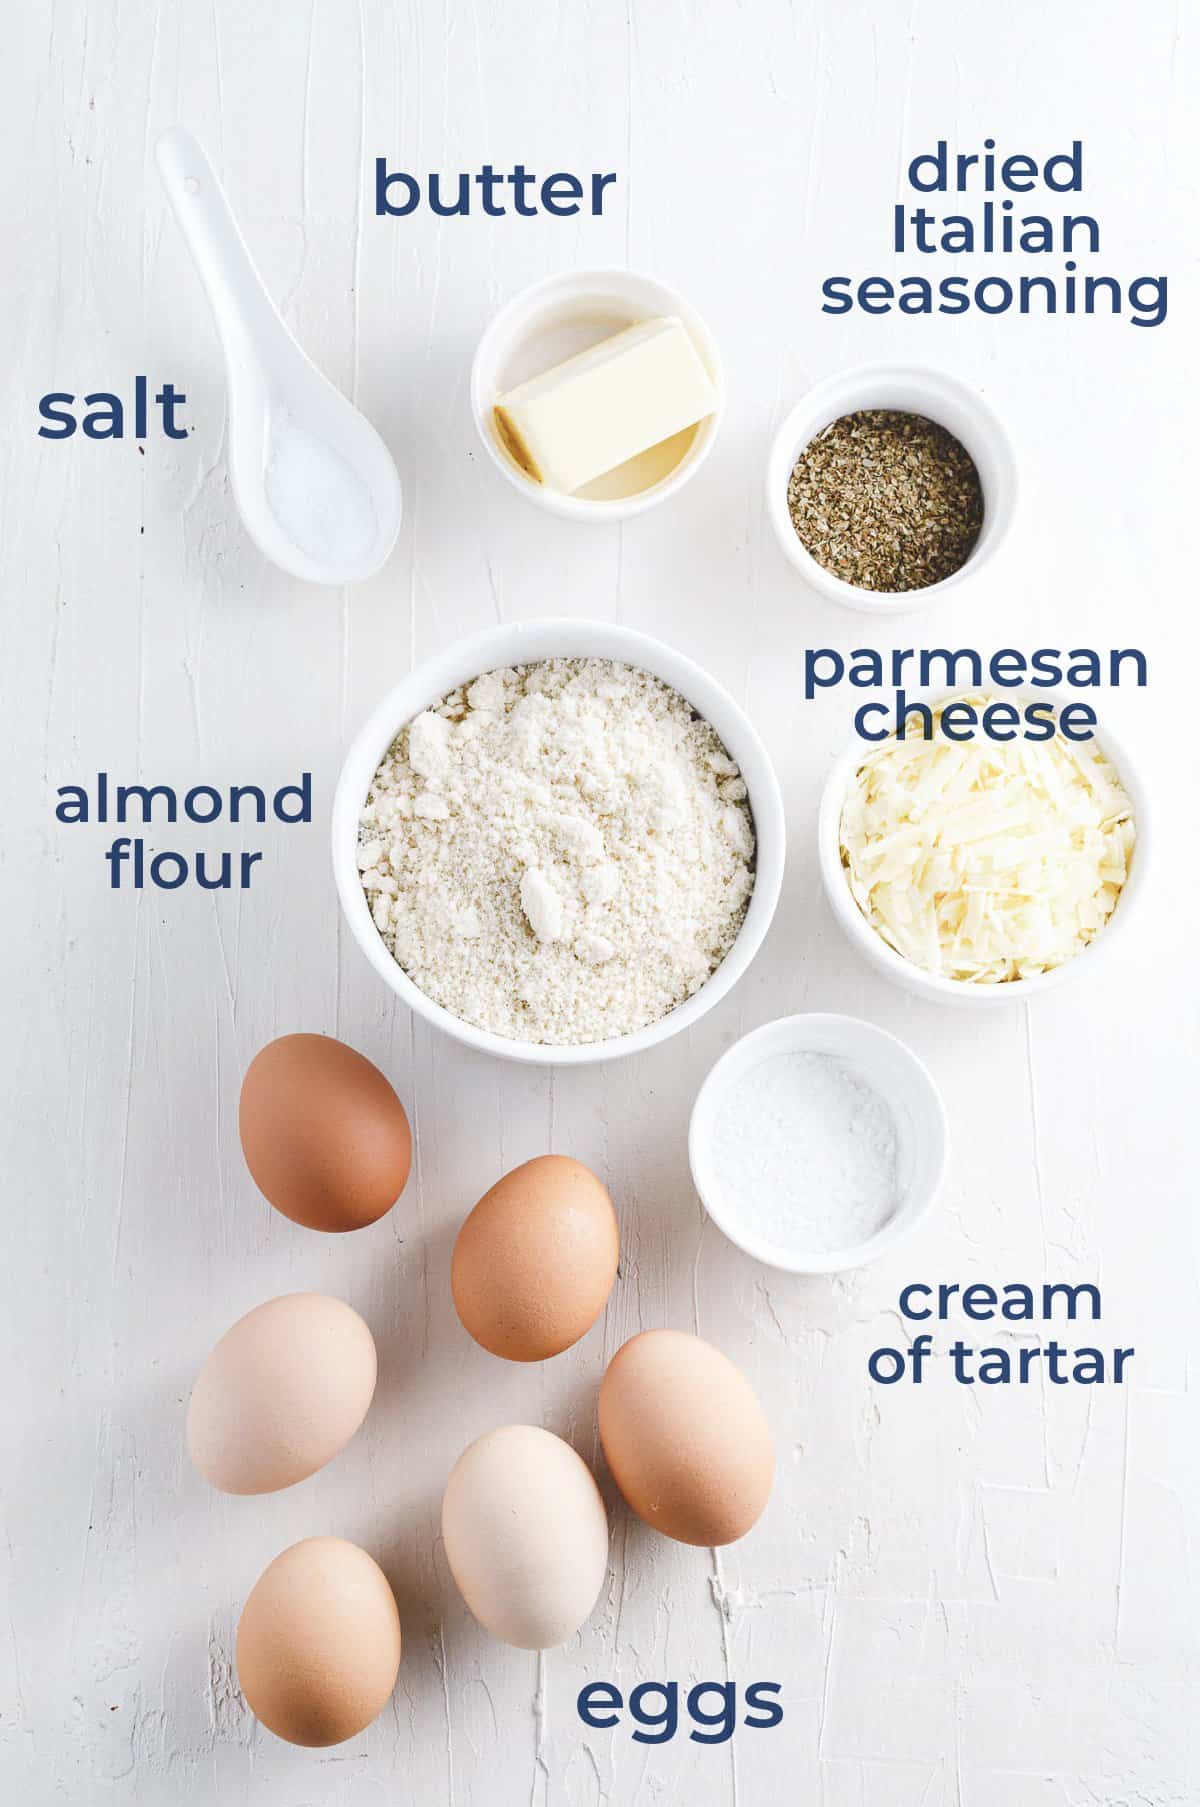 Ingredients all laid out in individual bowls to make a keto bread recipe.